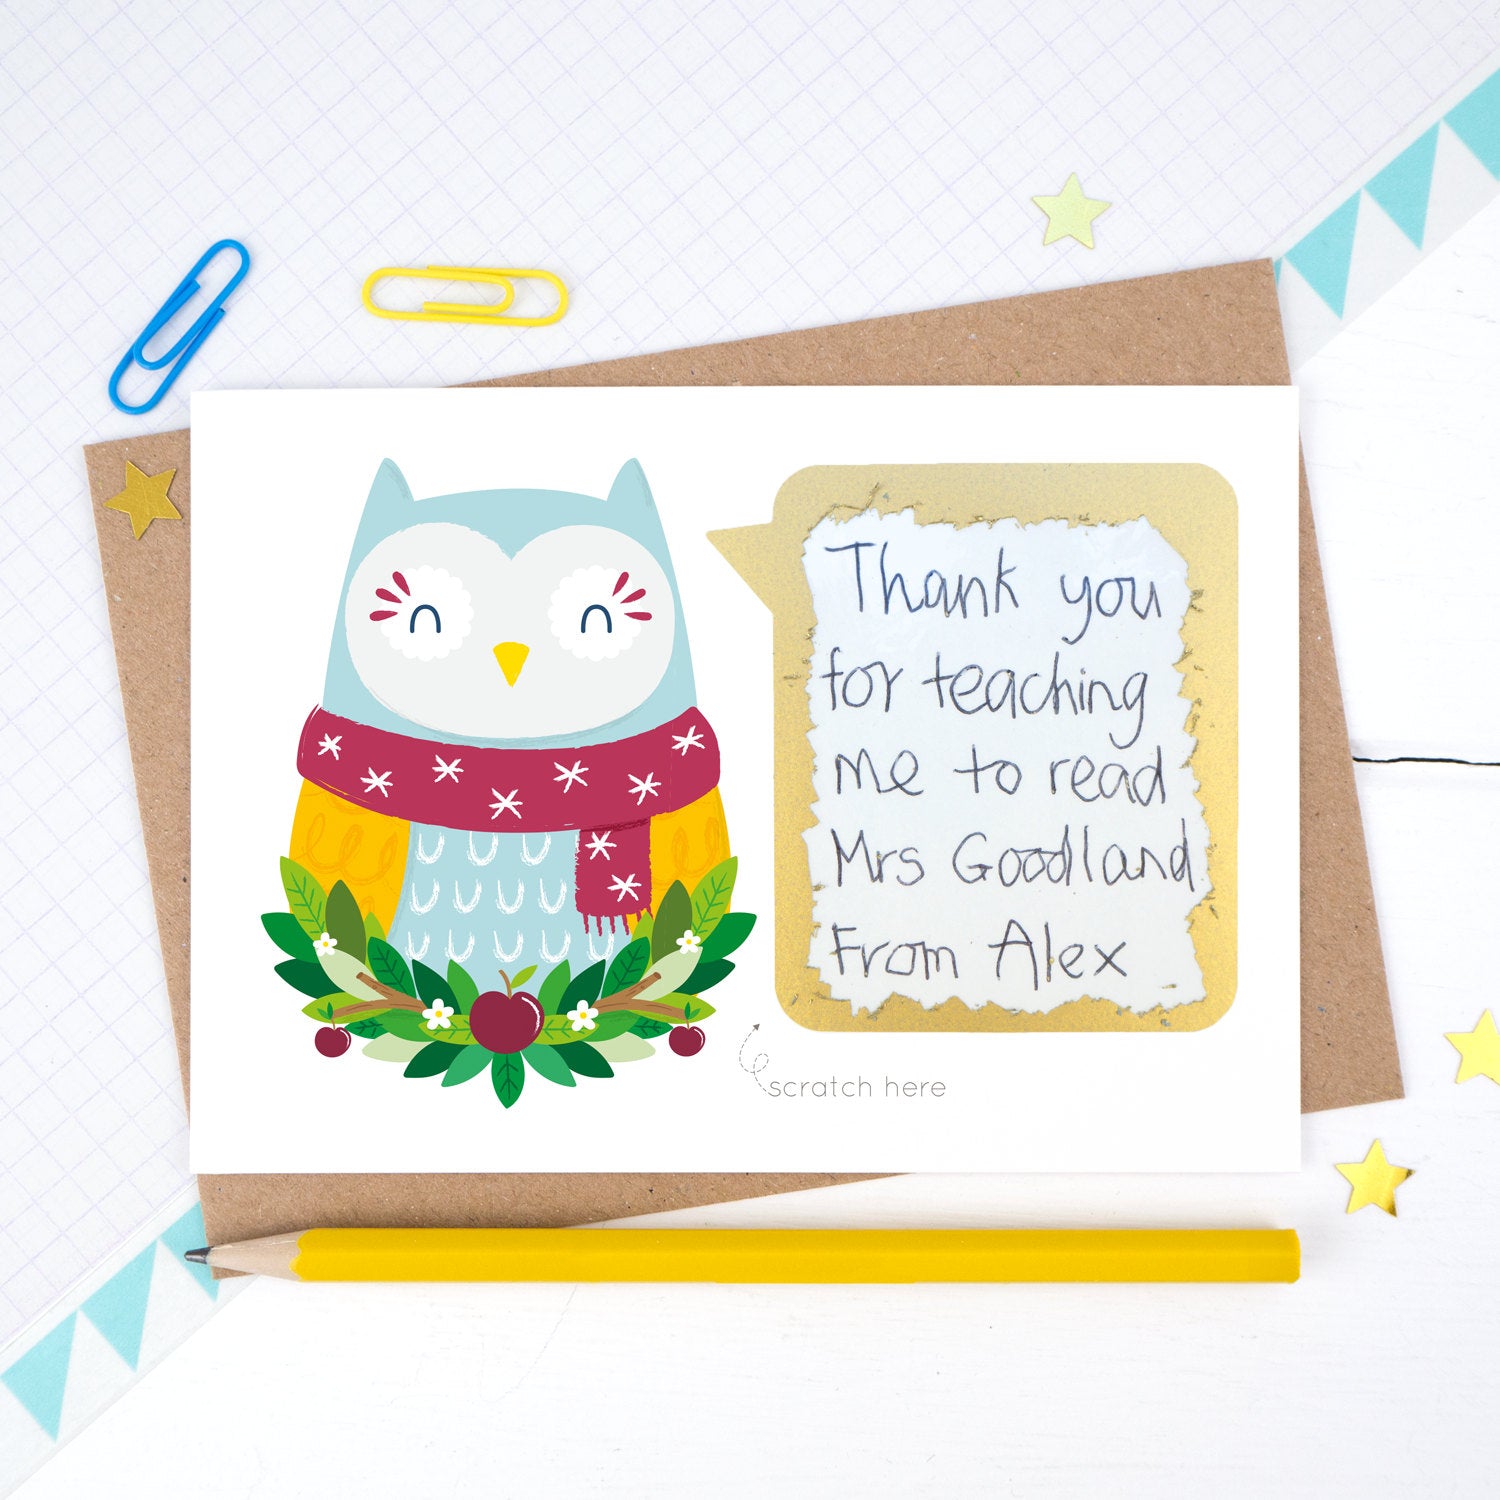 Thank you teacher scratchard with the owl in a scarf showing the scratched off secret message hand written by a child